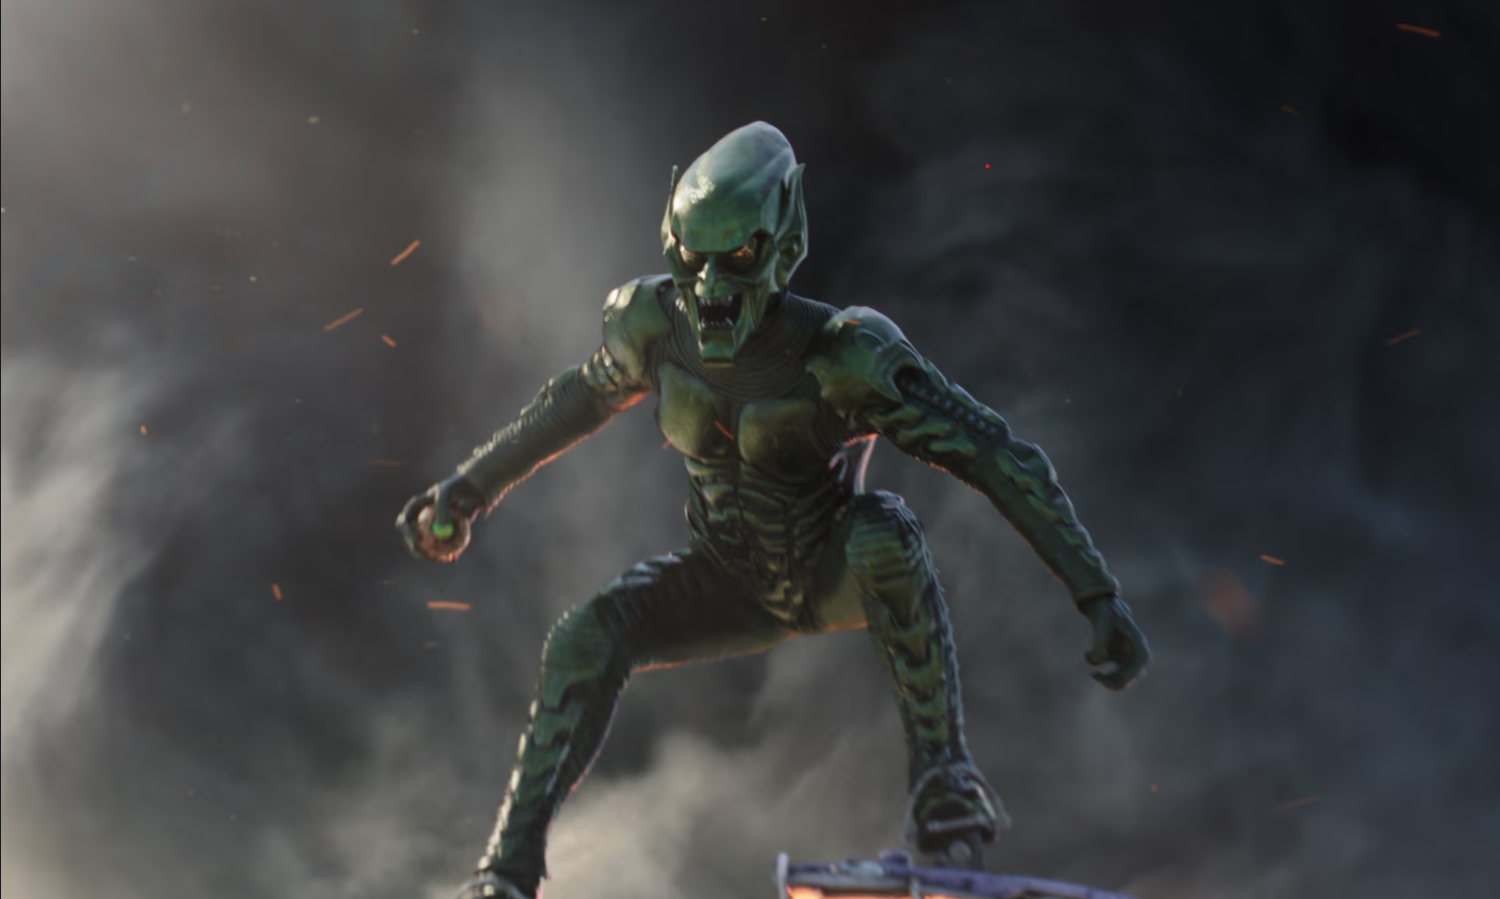 Still capable of coming off the bench to score the winning goal … Willem Dafoe as Green Goblin in Spider-Man: No Way Home. Photograph: Courtesy of Sony Pictures